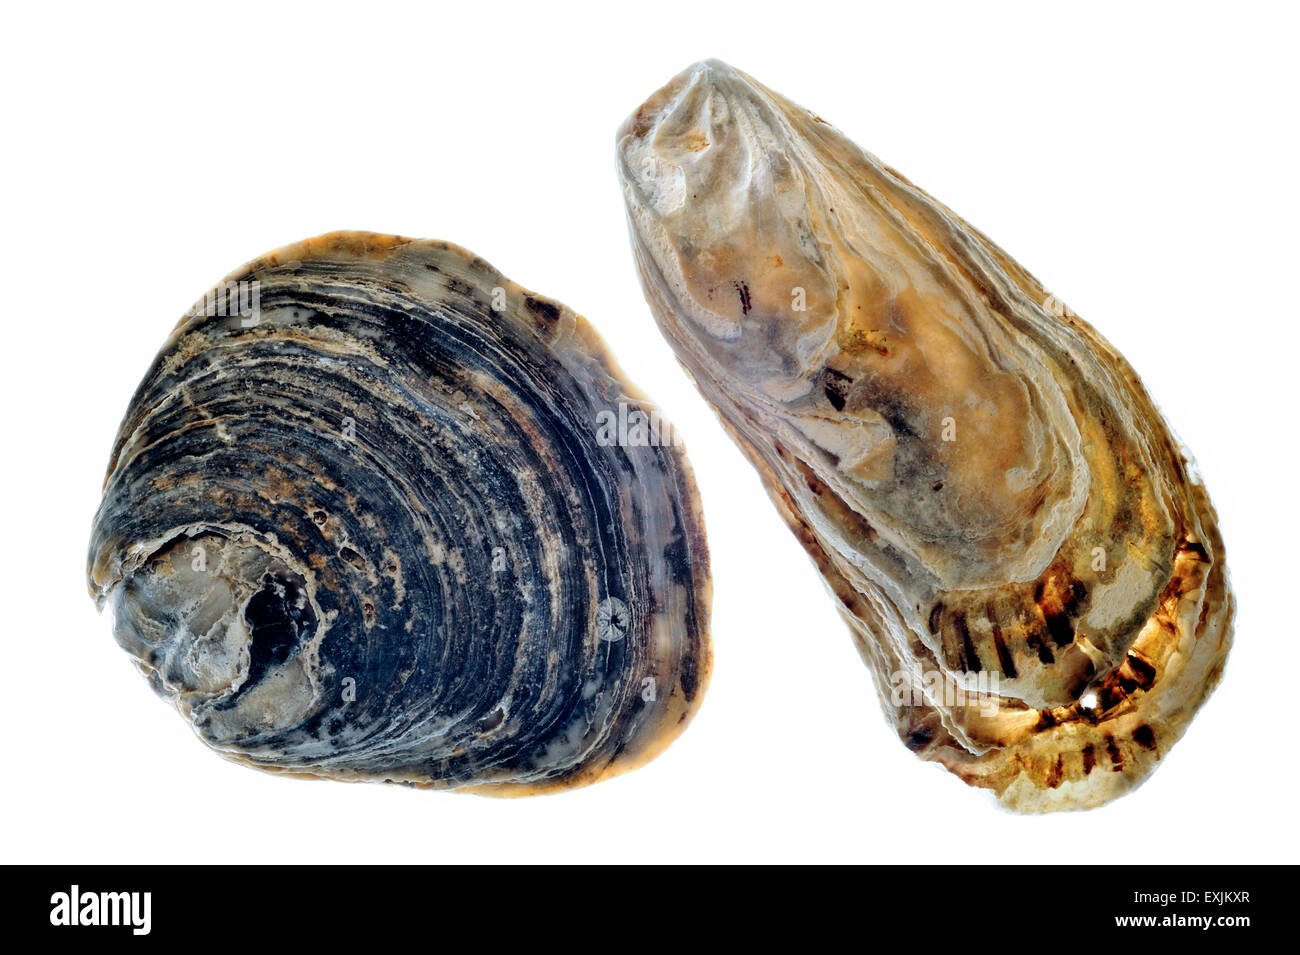 Common oyster / European flat oyster (Ostrea edulis) and Japanese Oyster / Pacific Oyster (Crassostrea gigas) on white Stock Photo